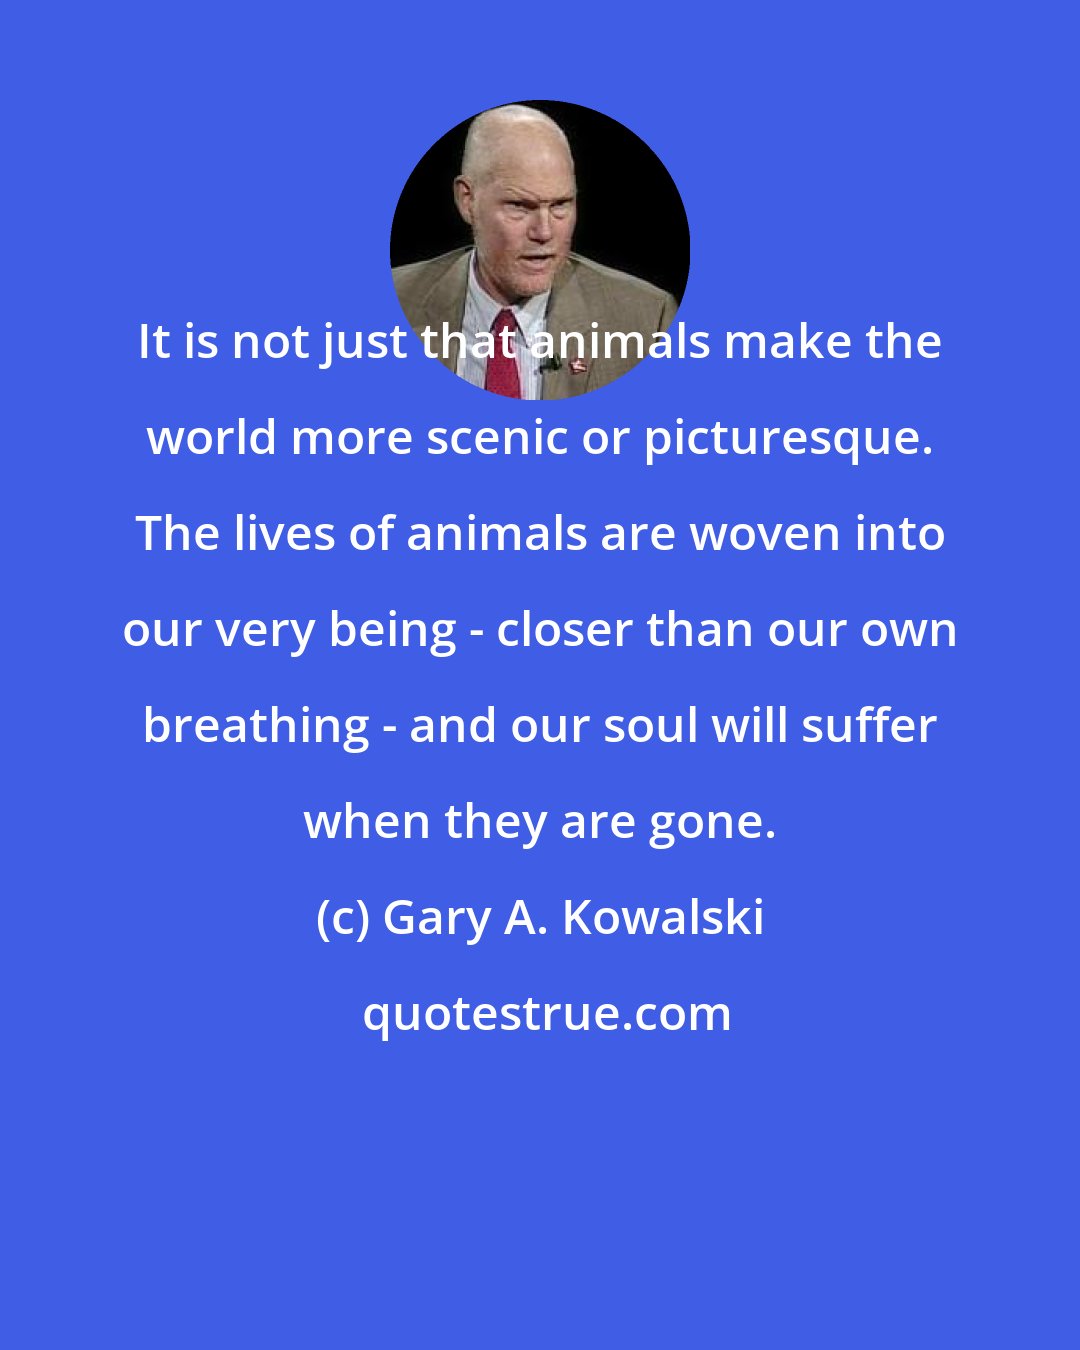 Gary A. Kowalski: It is not just that animals make the world more scenic or picturesque. The lives of animals are woven into our very being - closer than our own breathing - and our soul will suffer when they are gone.